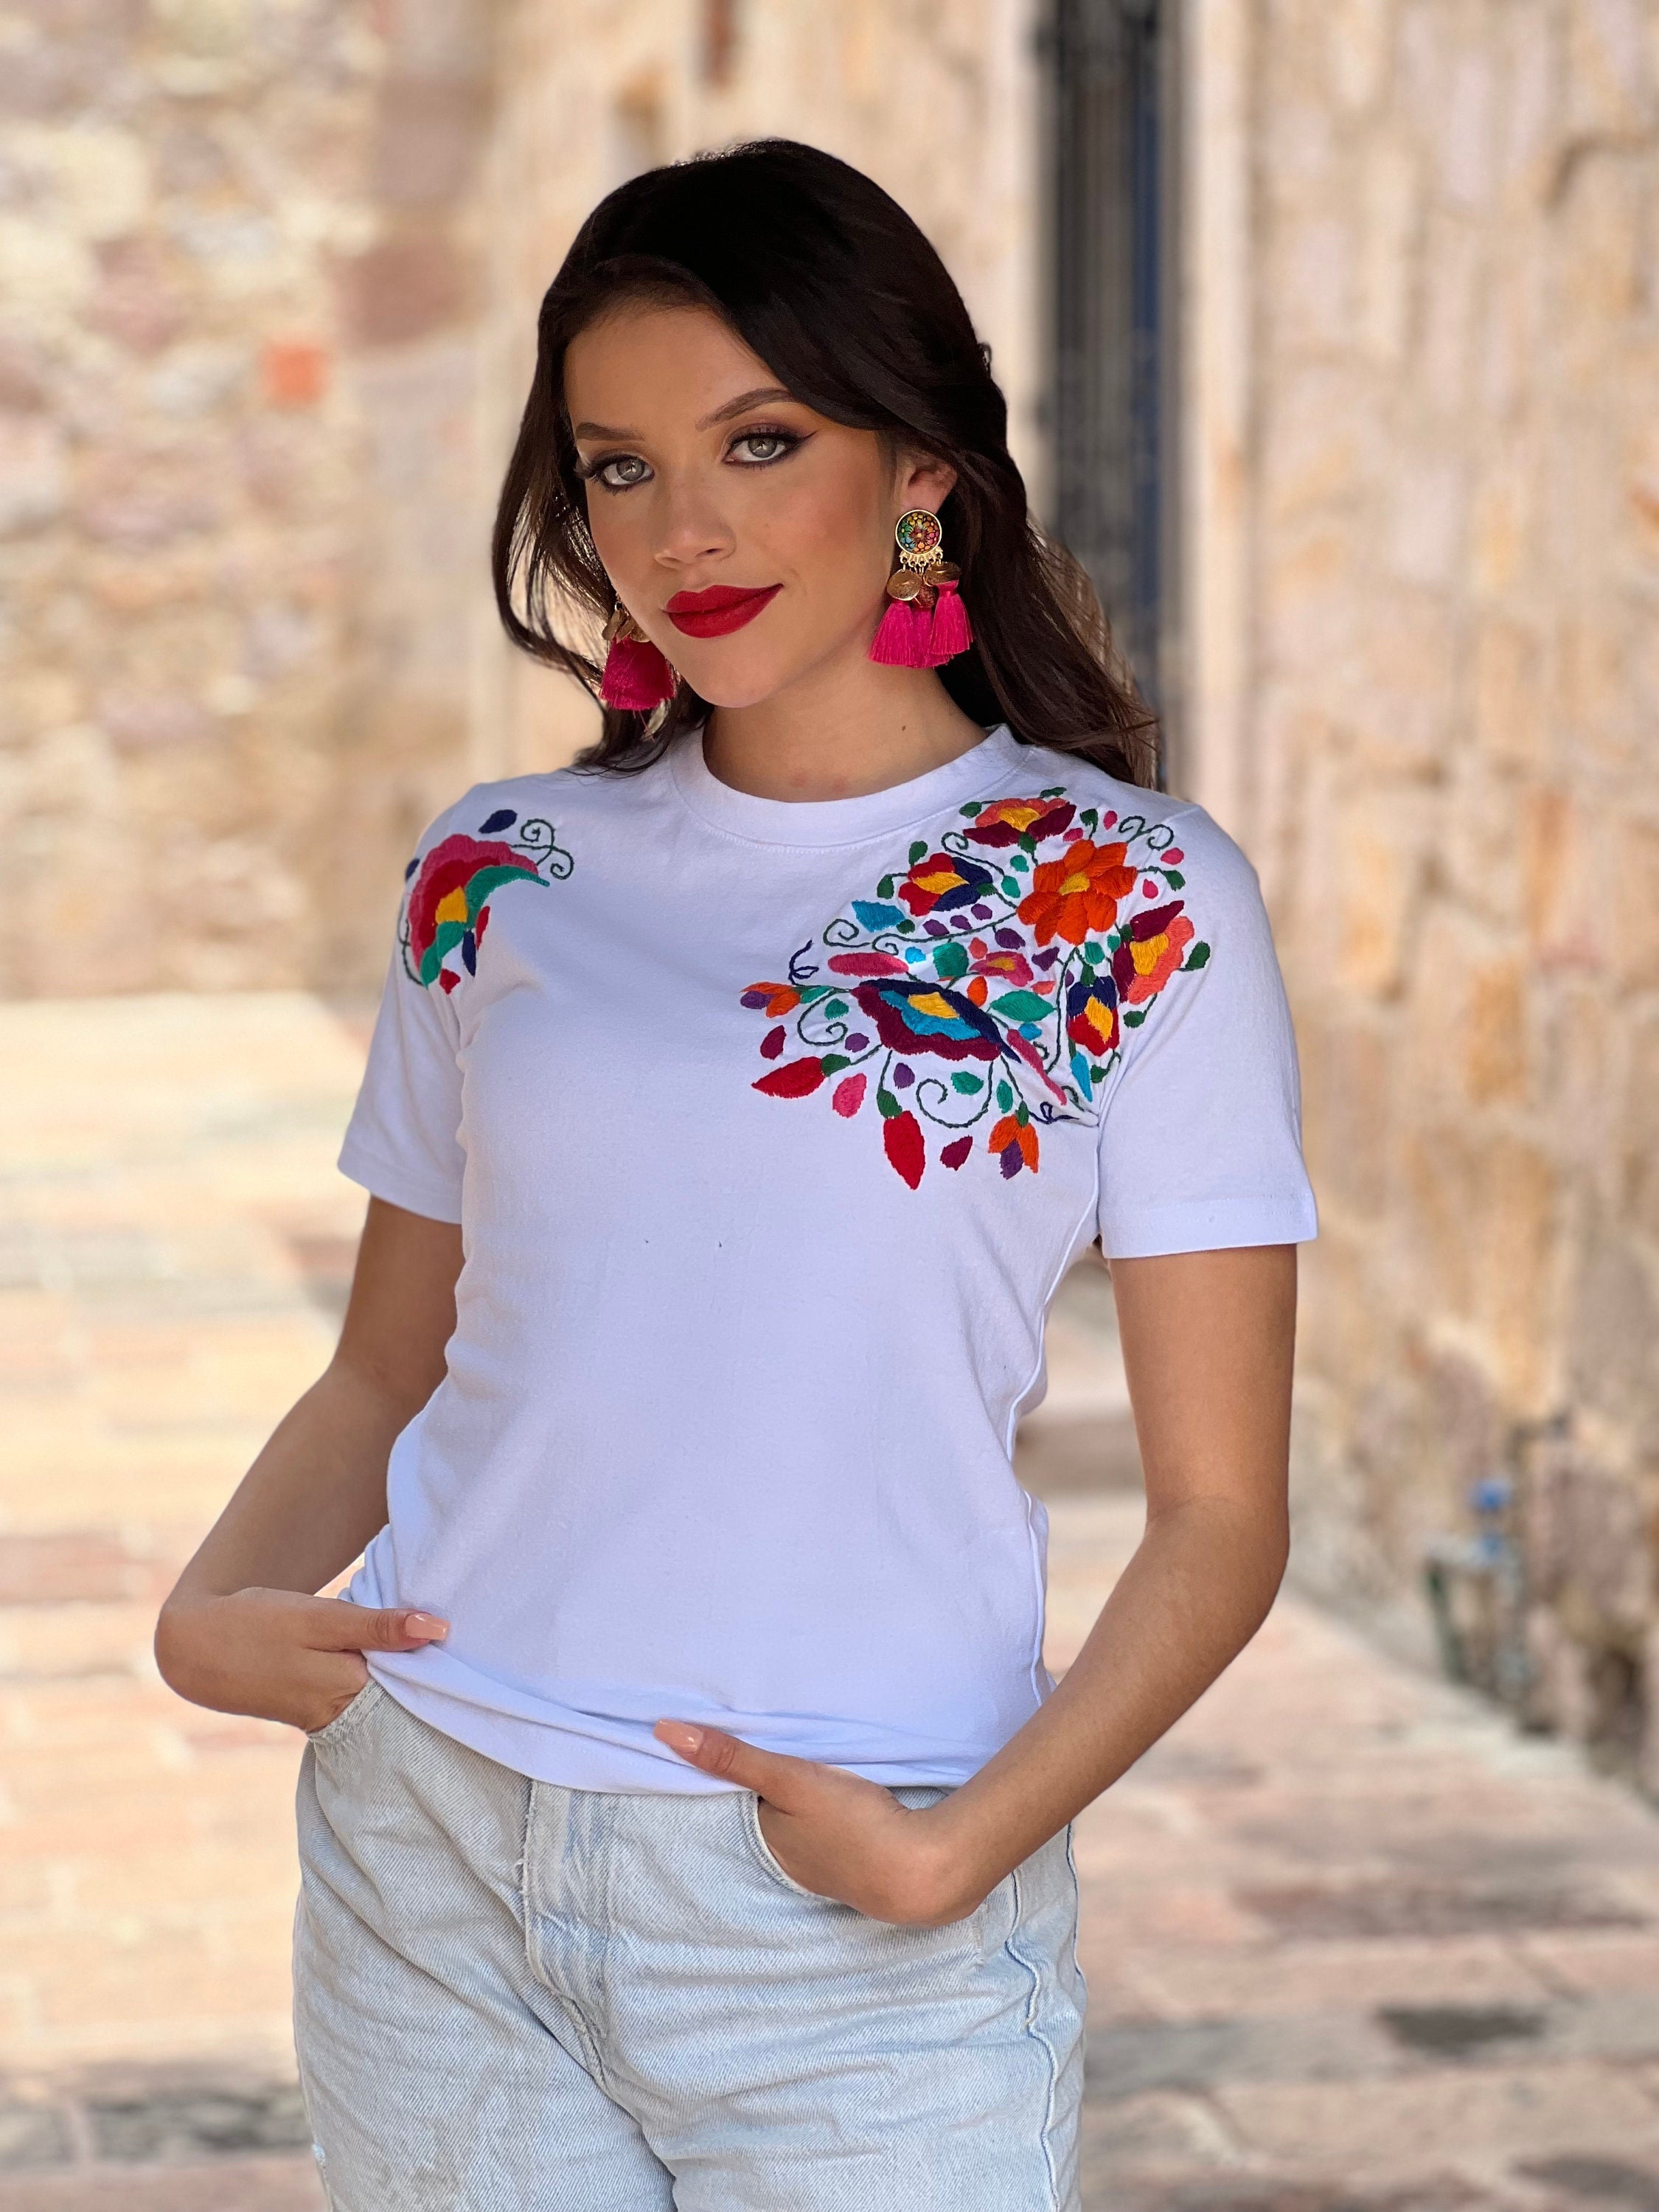 Floral Embroidered T-shirt. Size S 3X. Artisanal Mexican T-shirt. Colorful  Mexican Flowers. Mexican Basic Tee. Hippie-boho Style Top. -  Denmark